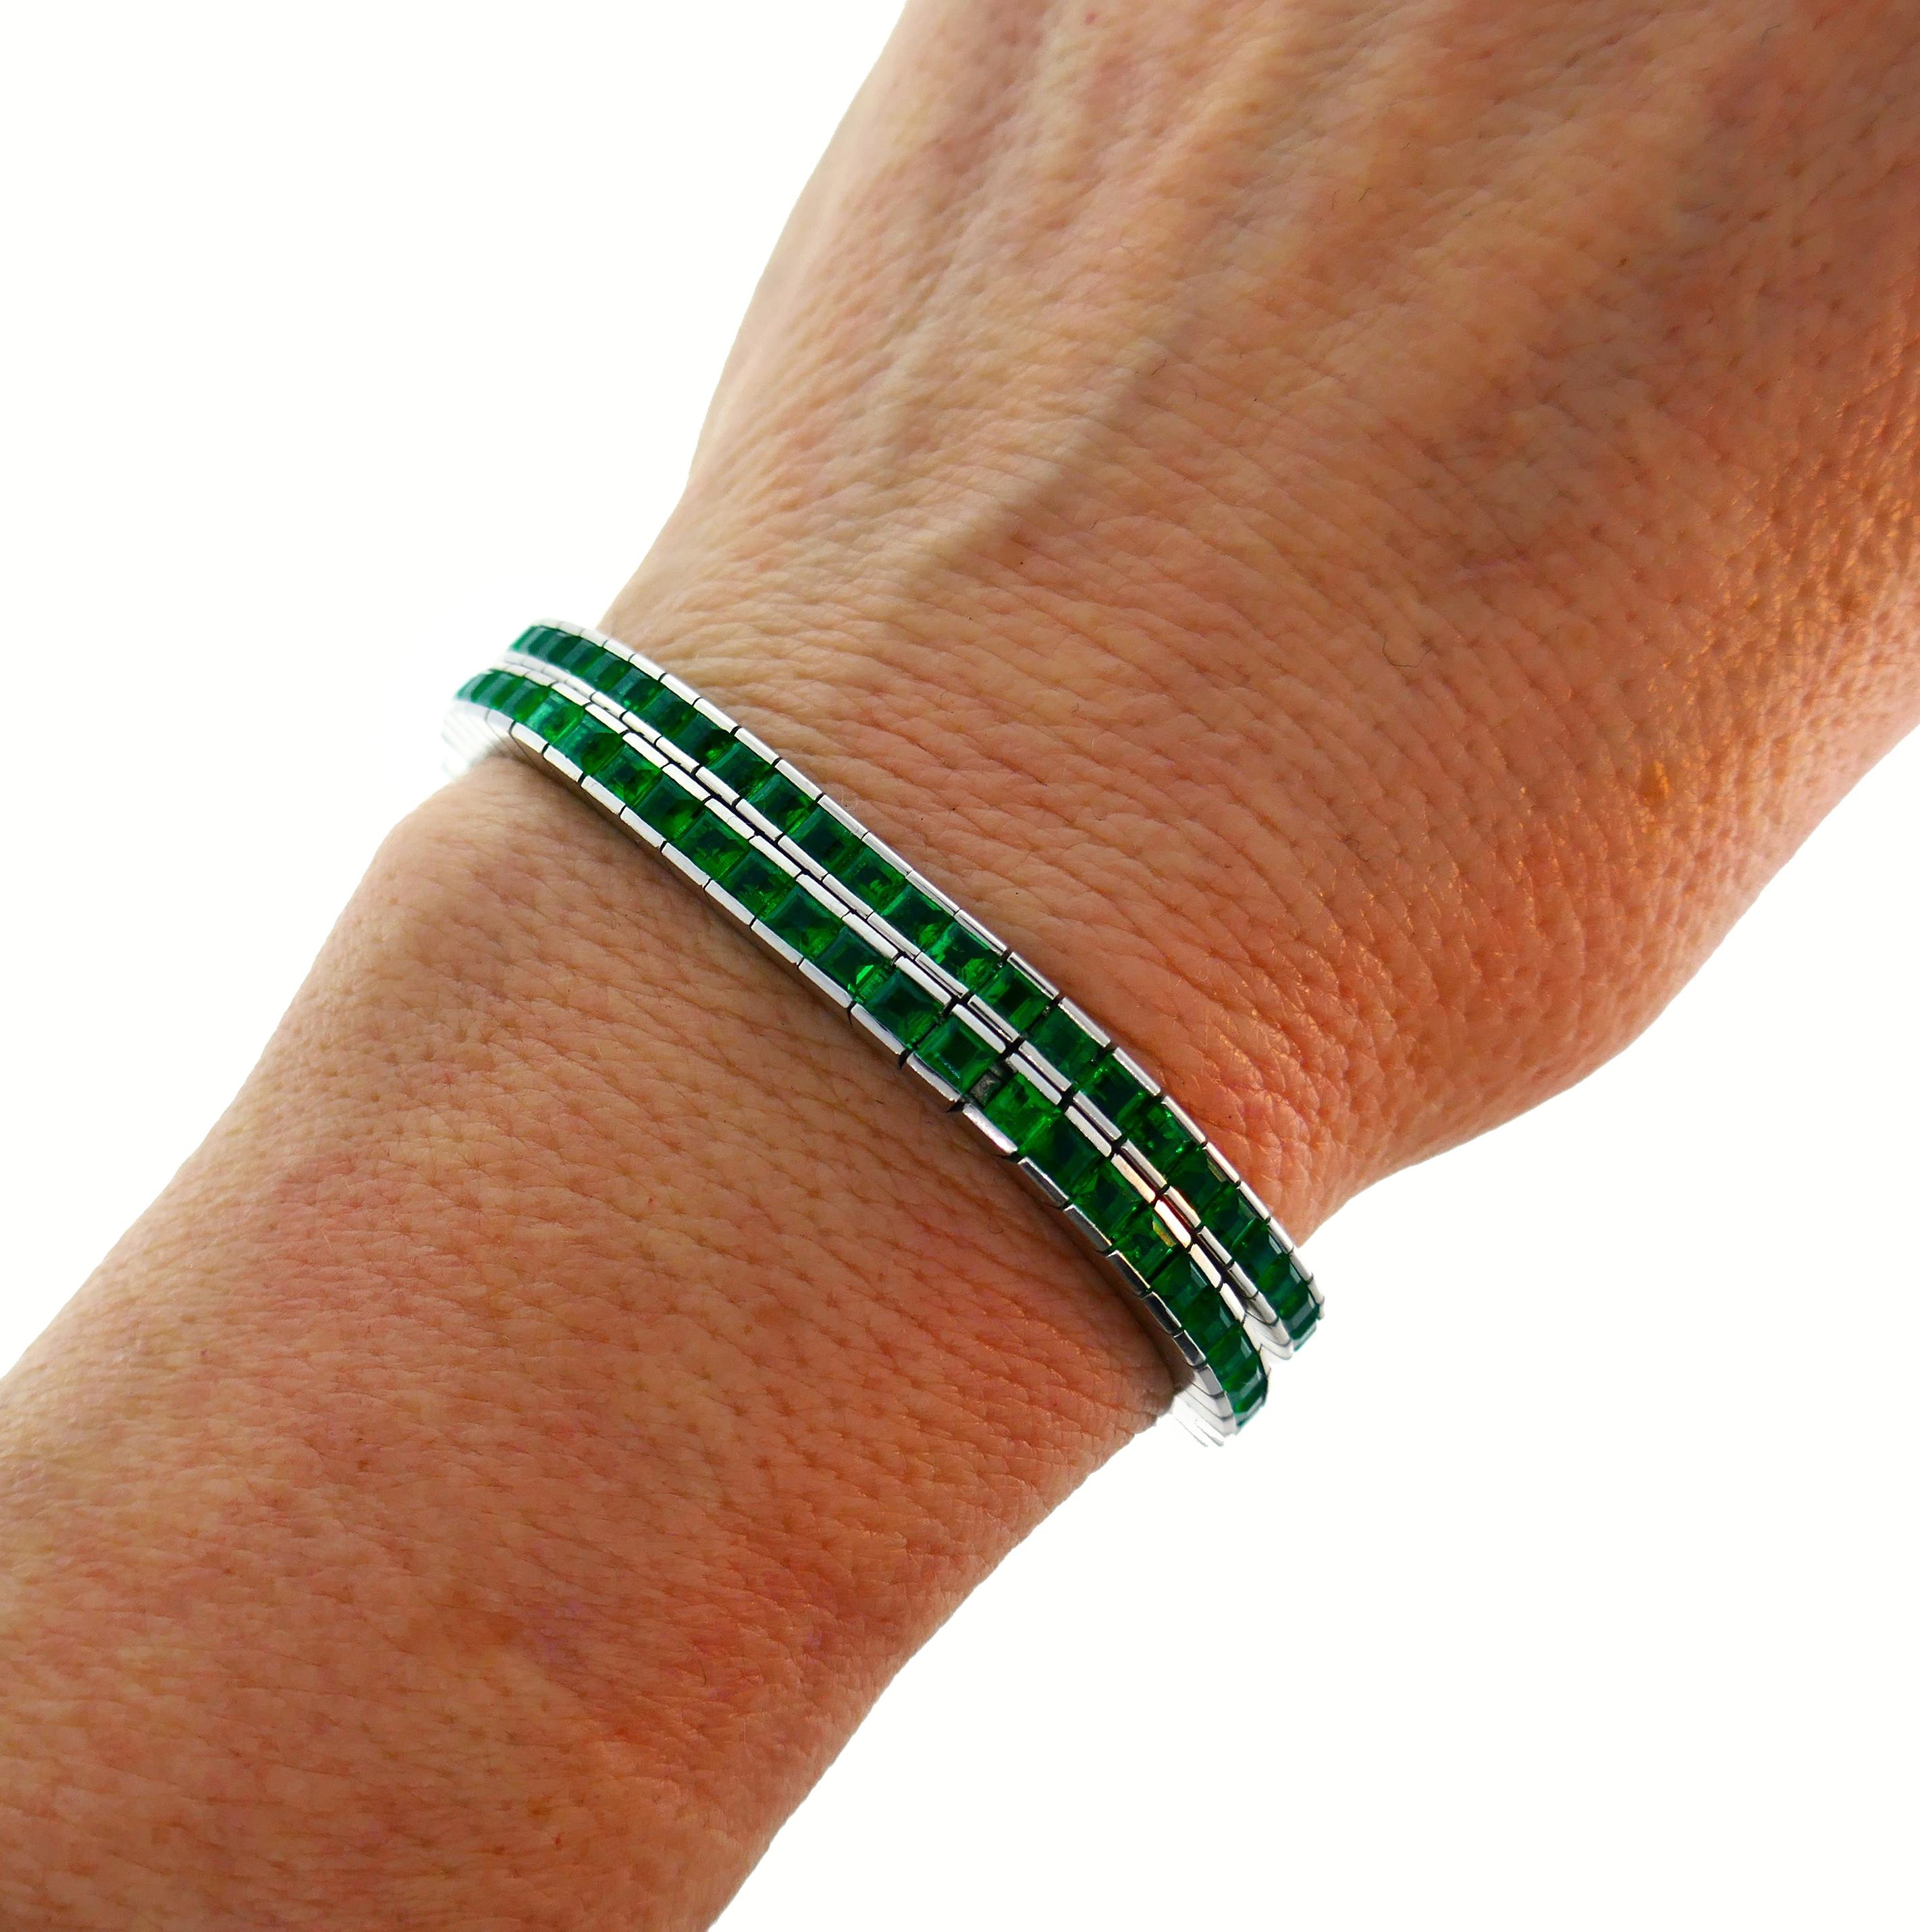 A pair of stunning ideally matched emerald and 18 karat white gold tennis bracelets. Each bracelet is substantial on its own and great for piling up.
Once bracelet is made by Meister and features fifty-nine table cut emeralds approximately 0.15